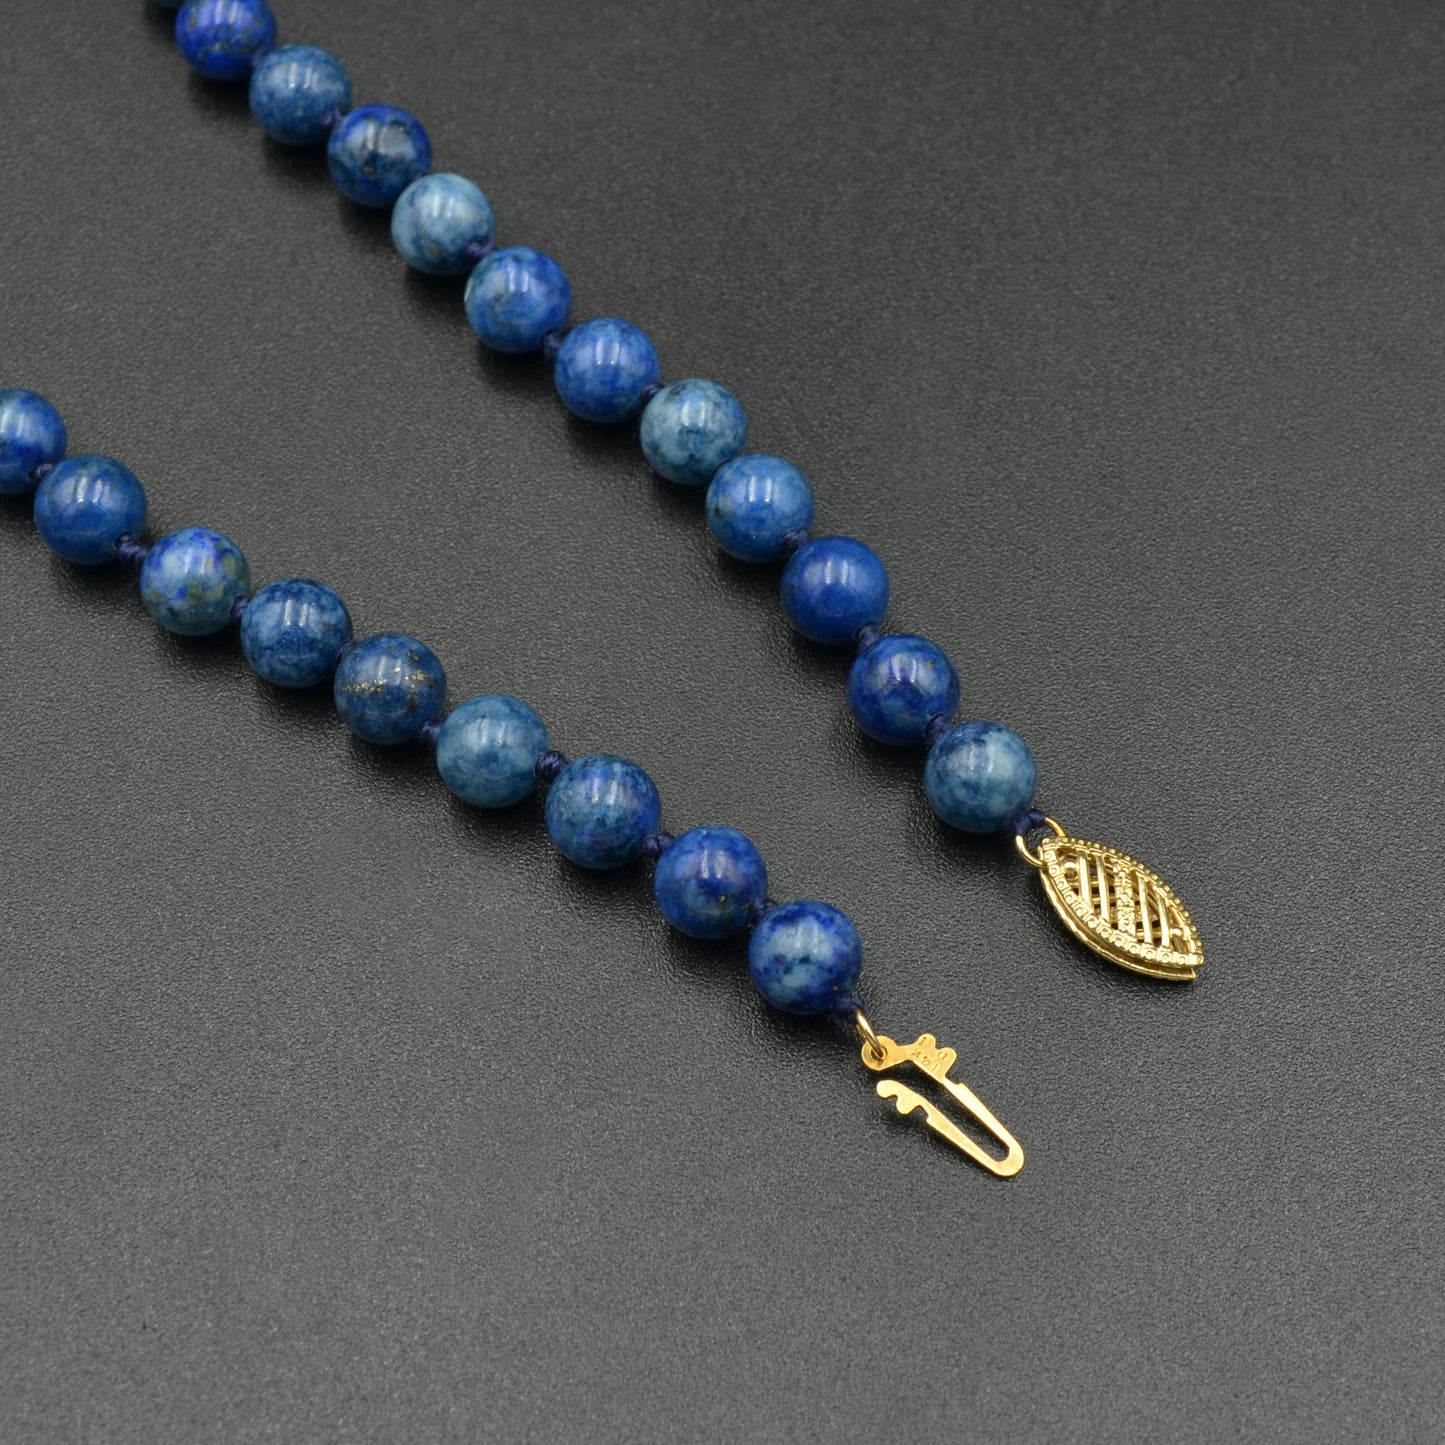 Knotted Lapis Necklace